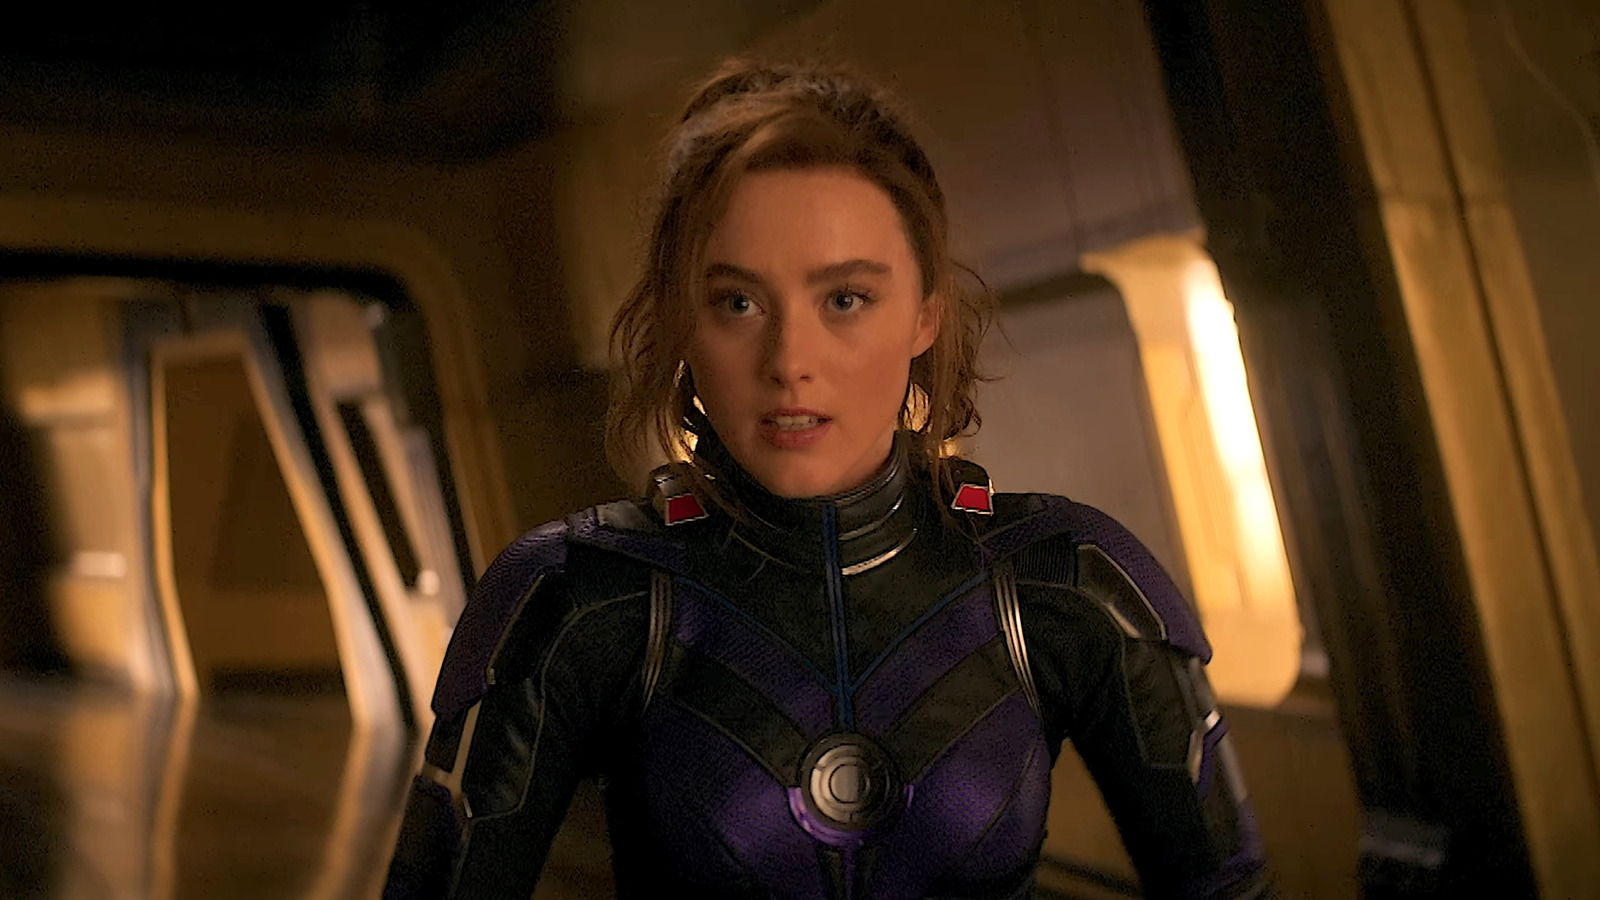 Ant-Man And The Wasp Quantumania: Kathryn Newton Joins Cast